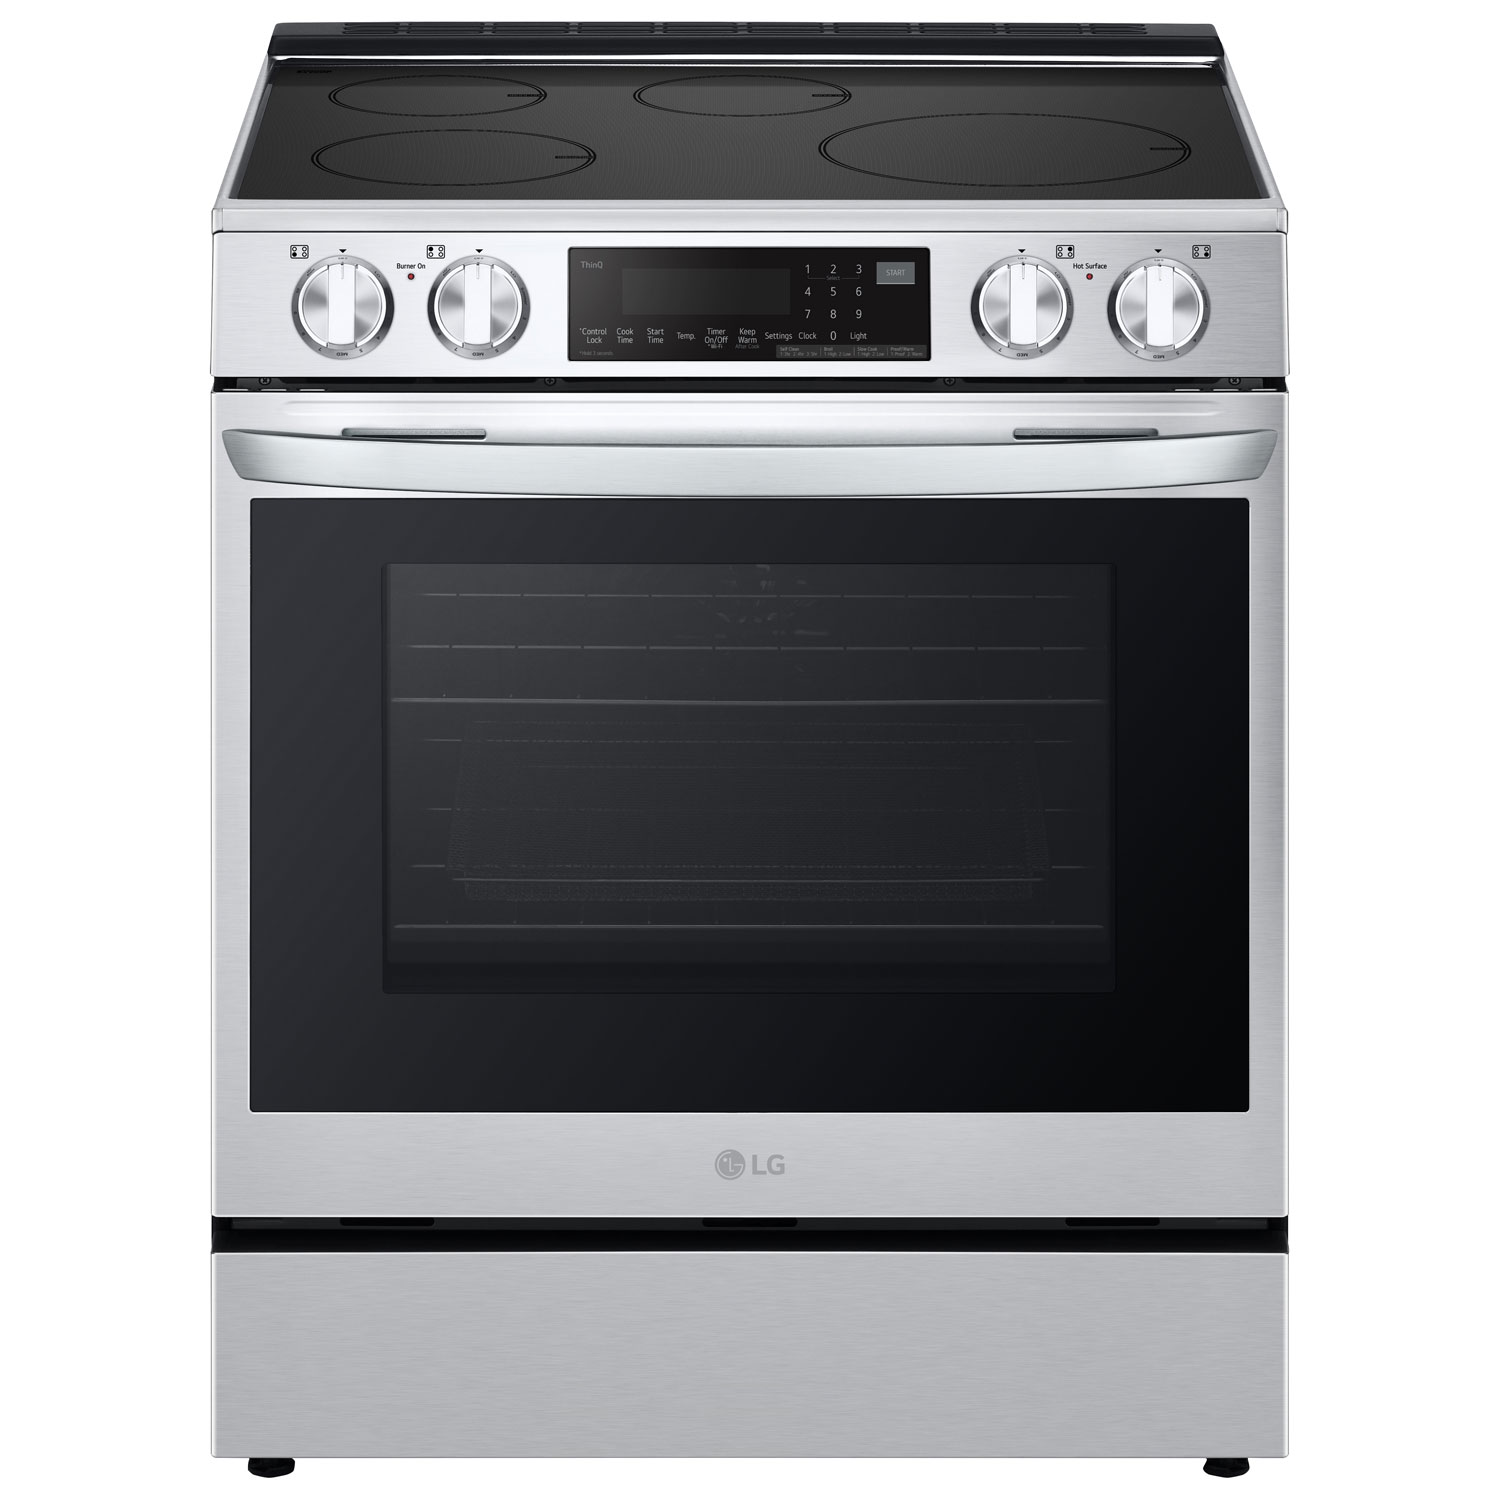 LG 30" 6.3 Cu Ft True Convection Slide-In Smart Induction Air Fry Range (LSIL6334F) - Print Proof Stainless